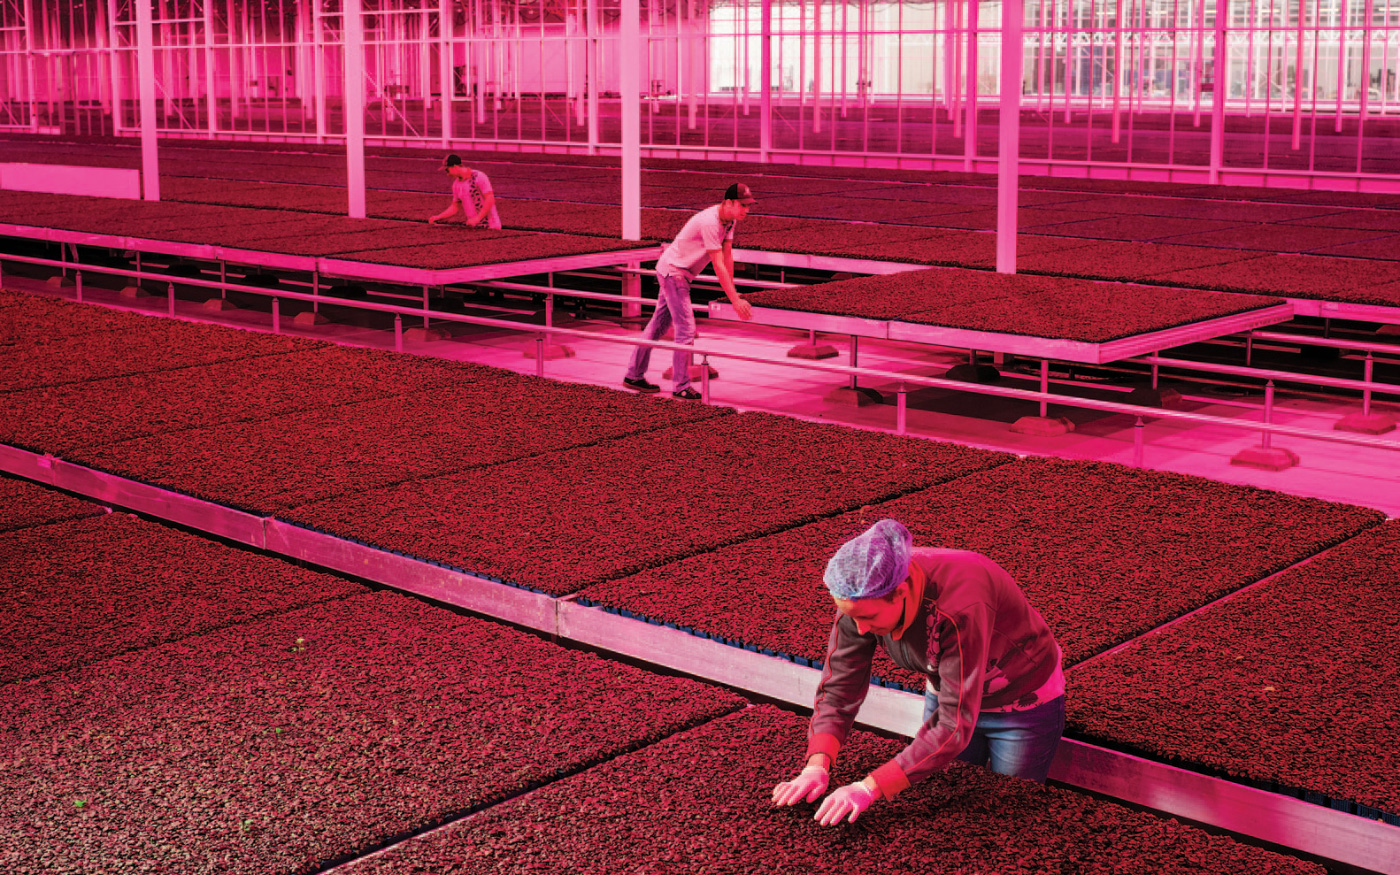 People working with soil in large greenhouse with pink lighting